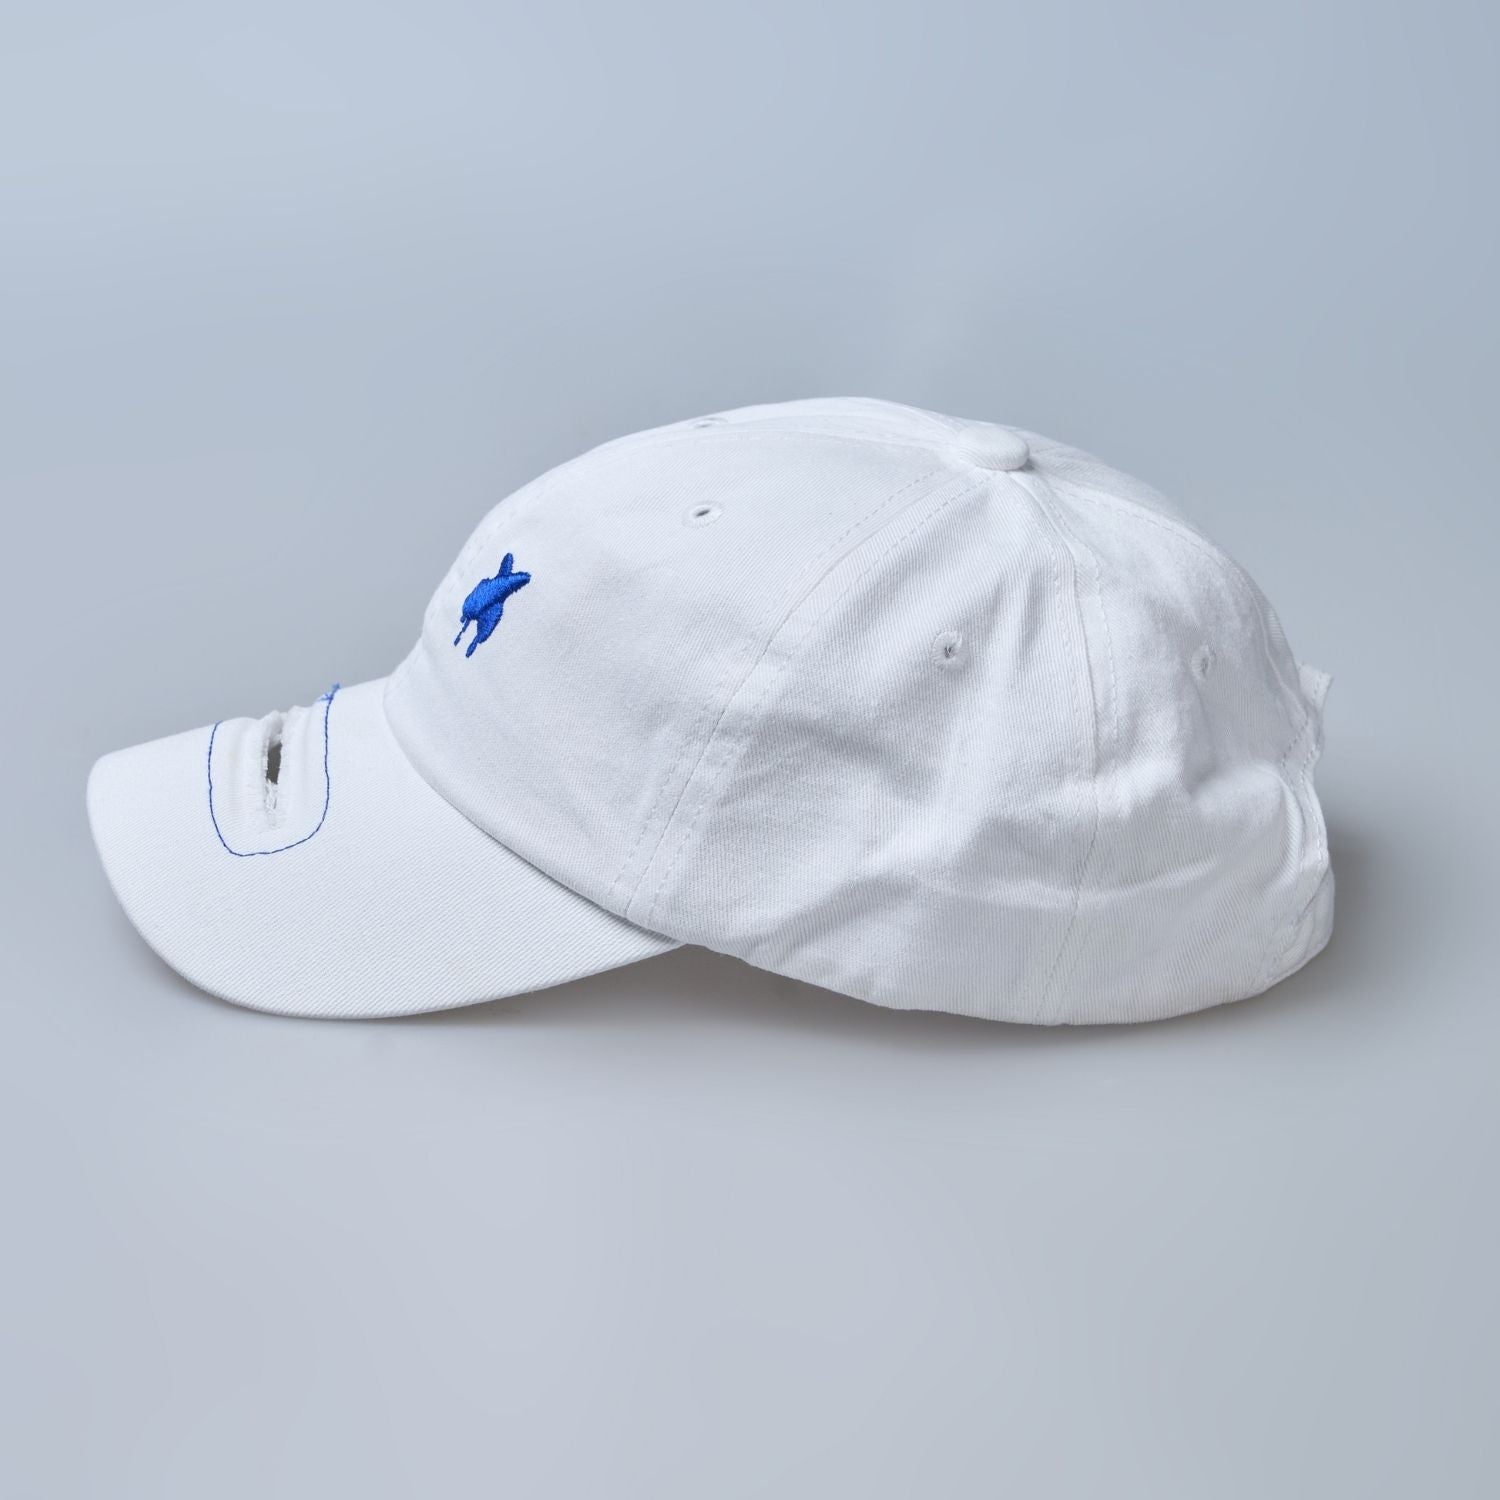 white colored, wide brim cap for men with adjustable strap, side view.